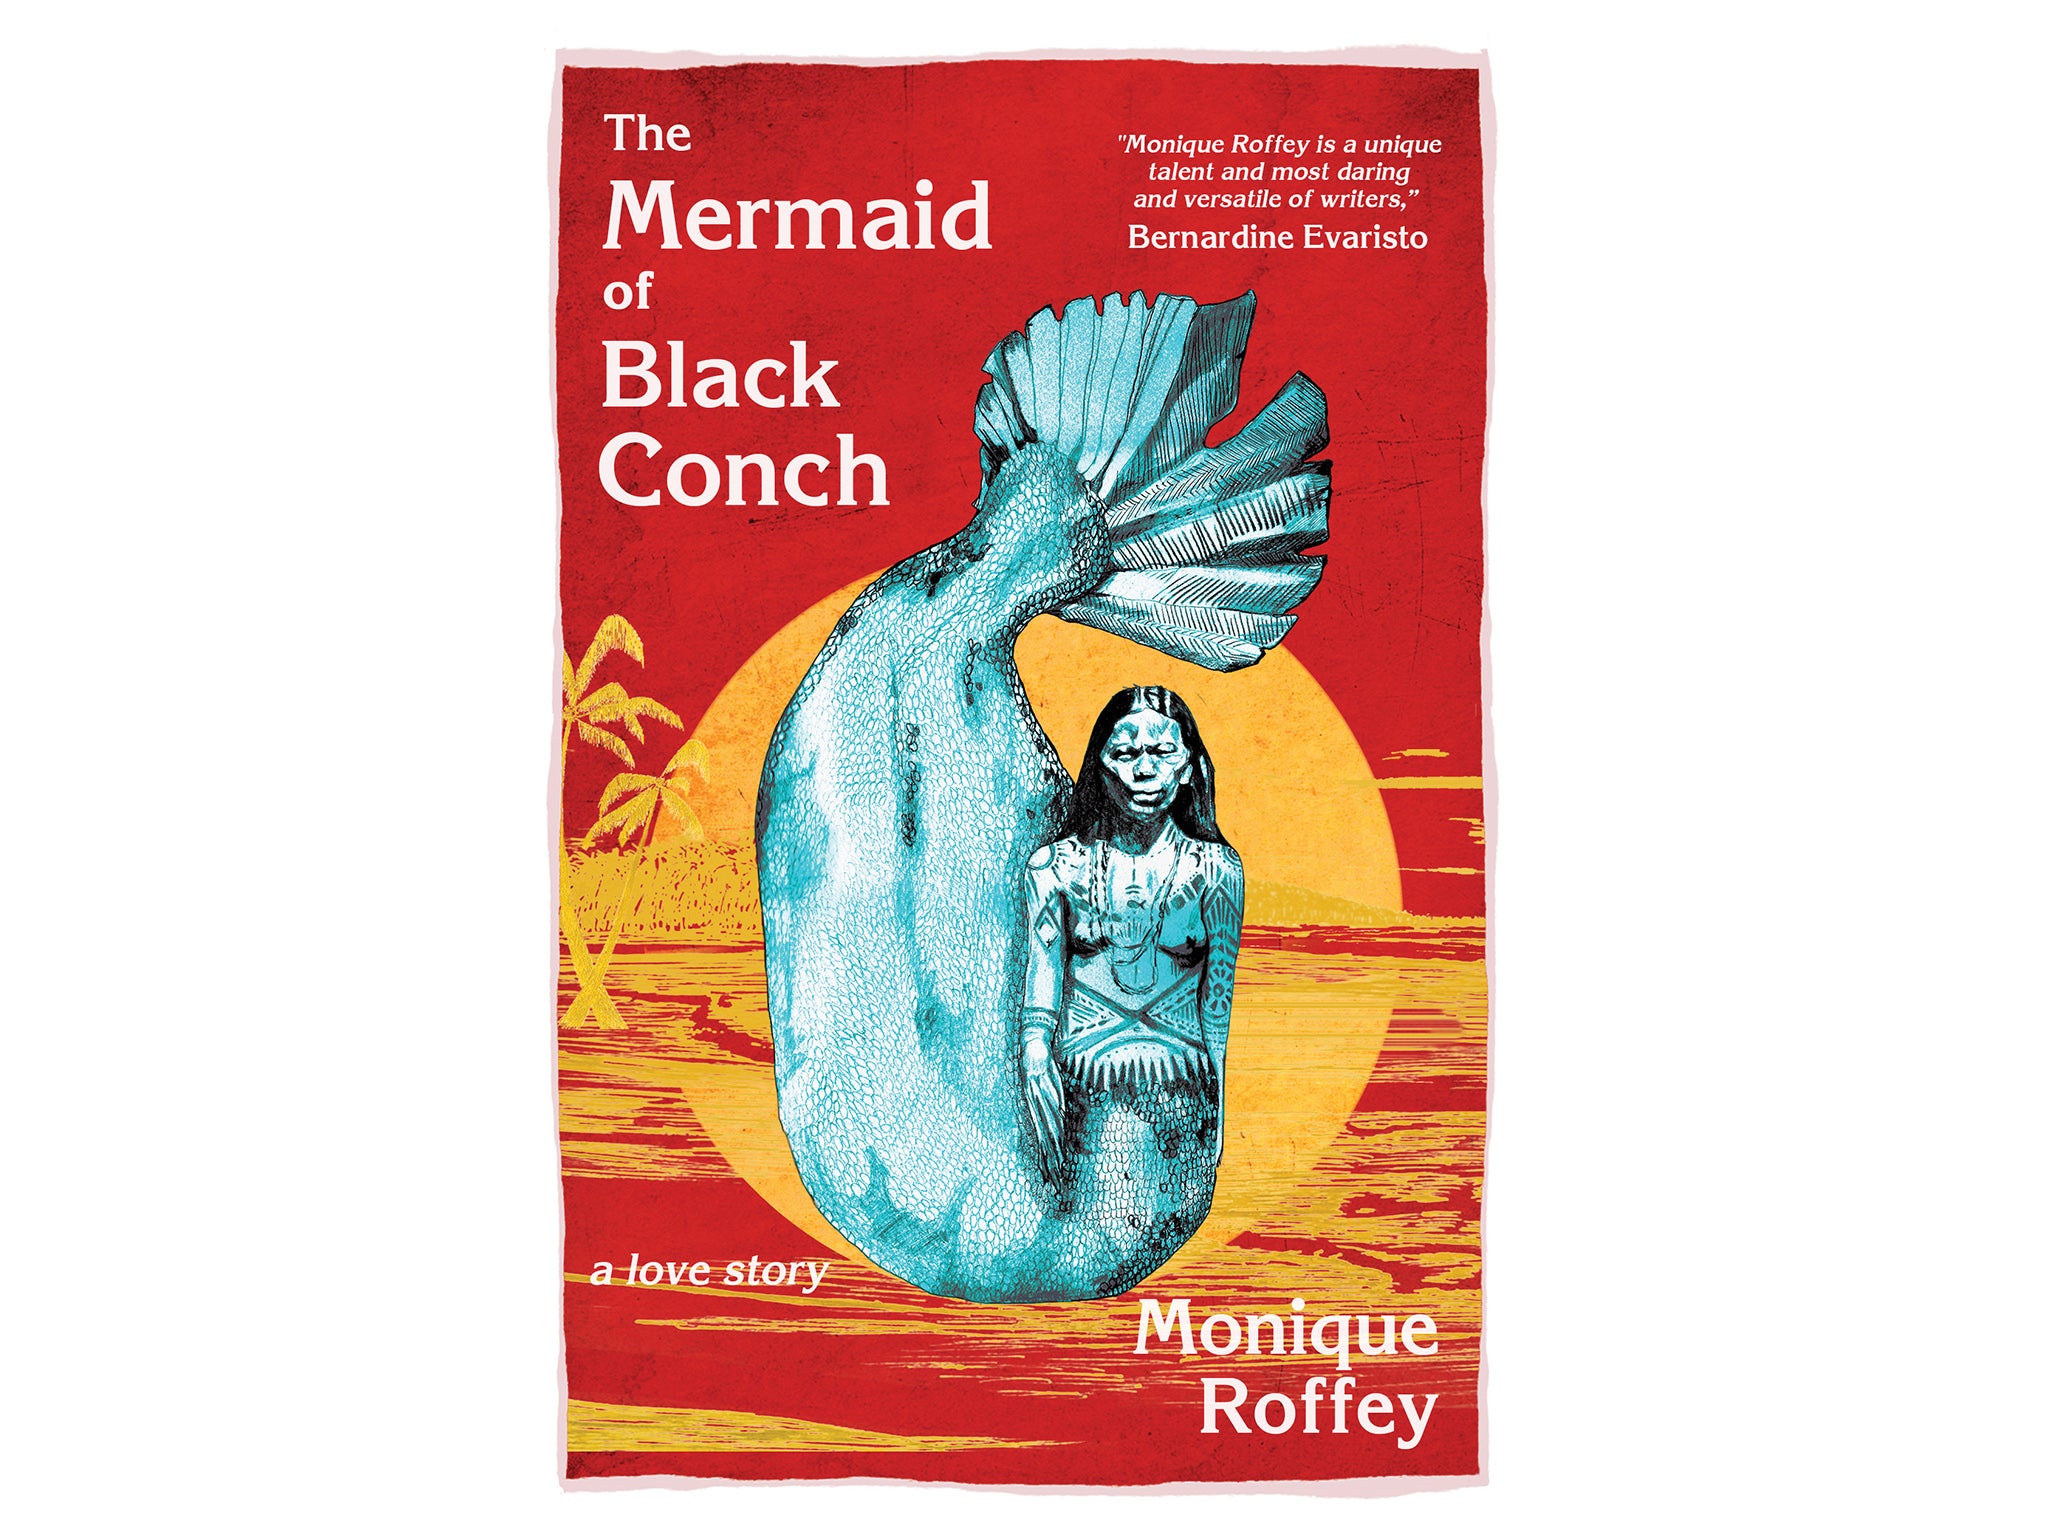 The-Mermaid-of-Black-Conch-costa-book-awards-indybest.jpg